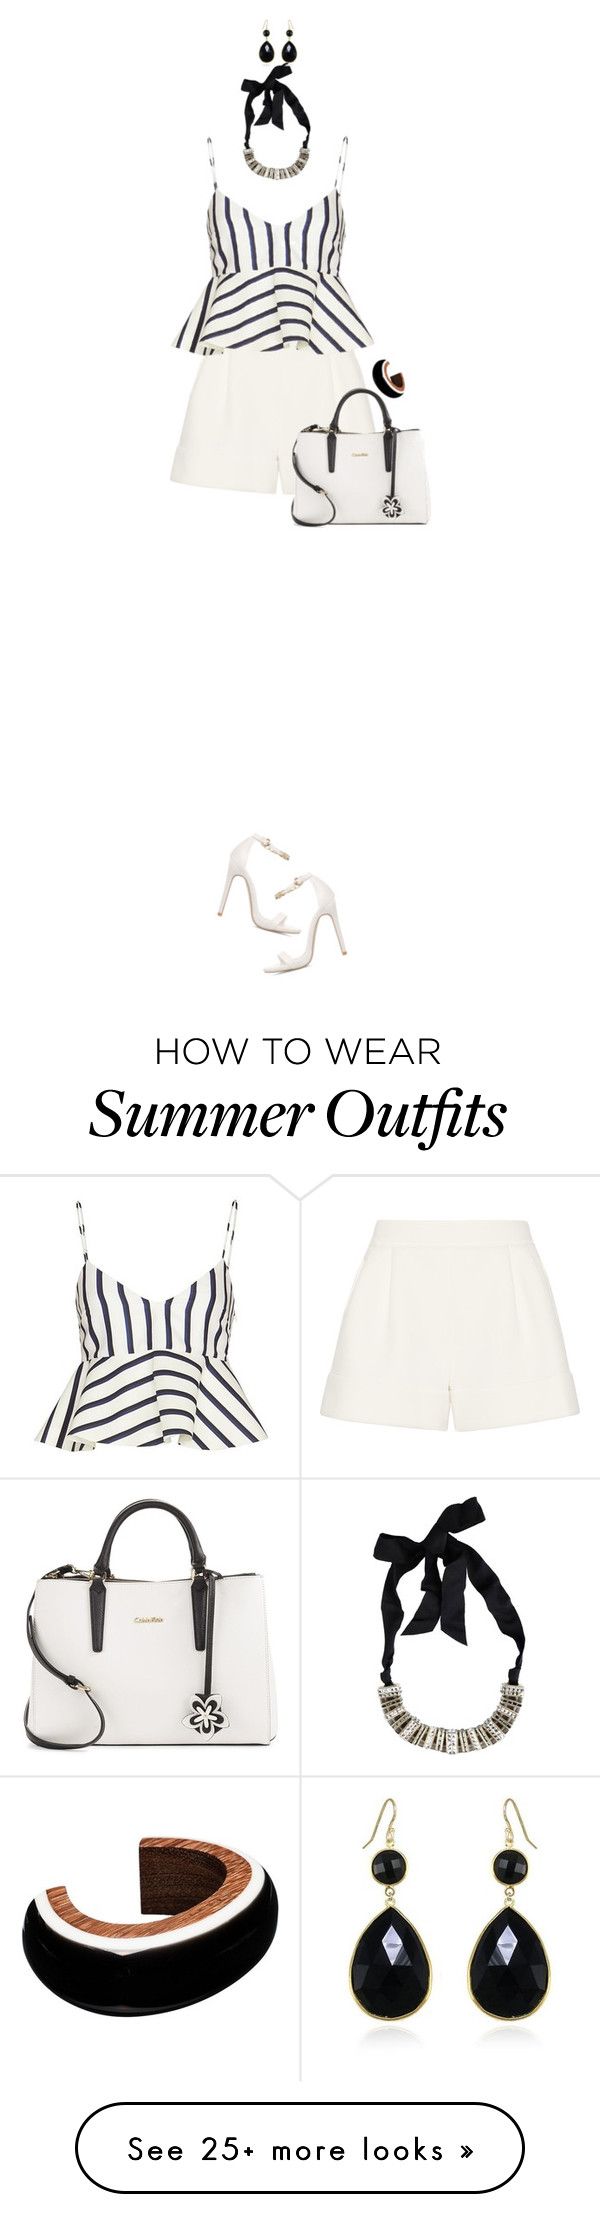 "Spaghetti Strap Tops For Summer" by ittie-kittie on Polyvore featurin...